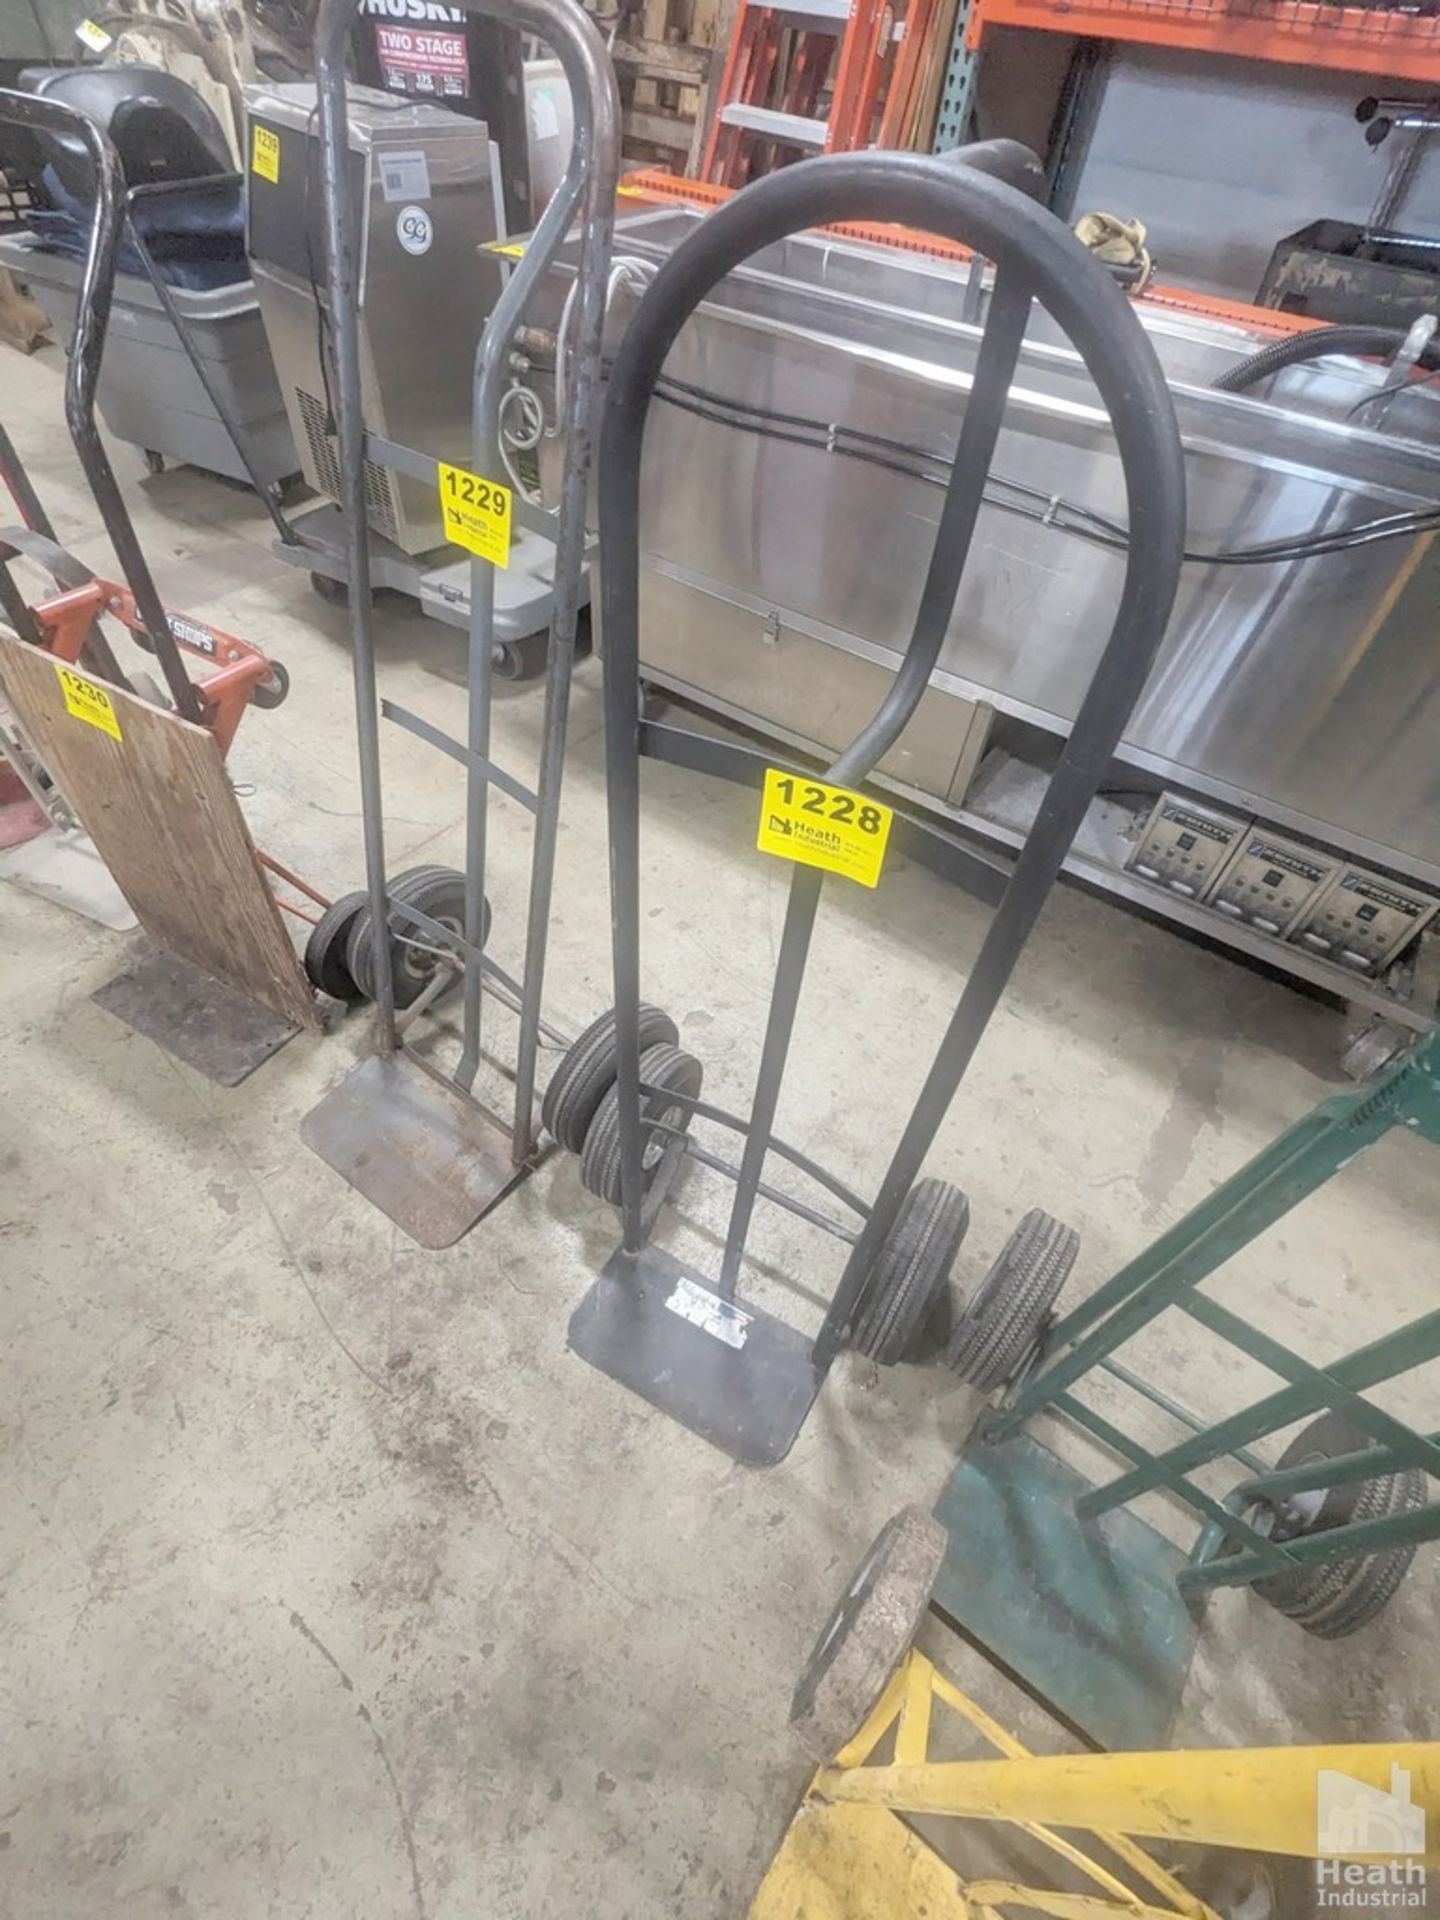 TWO WHEEL HAND TRUCK WITH PNEUMATIC WHEELS